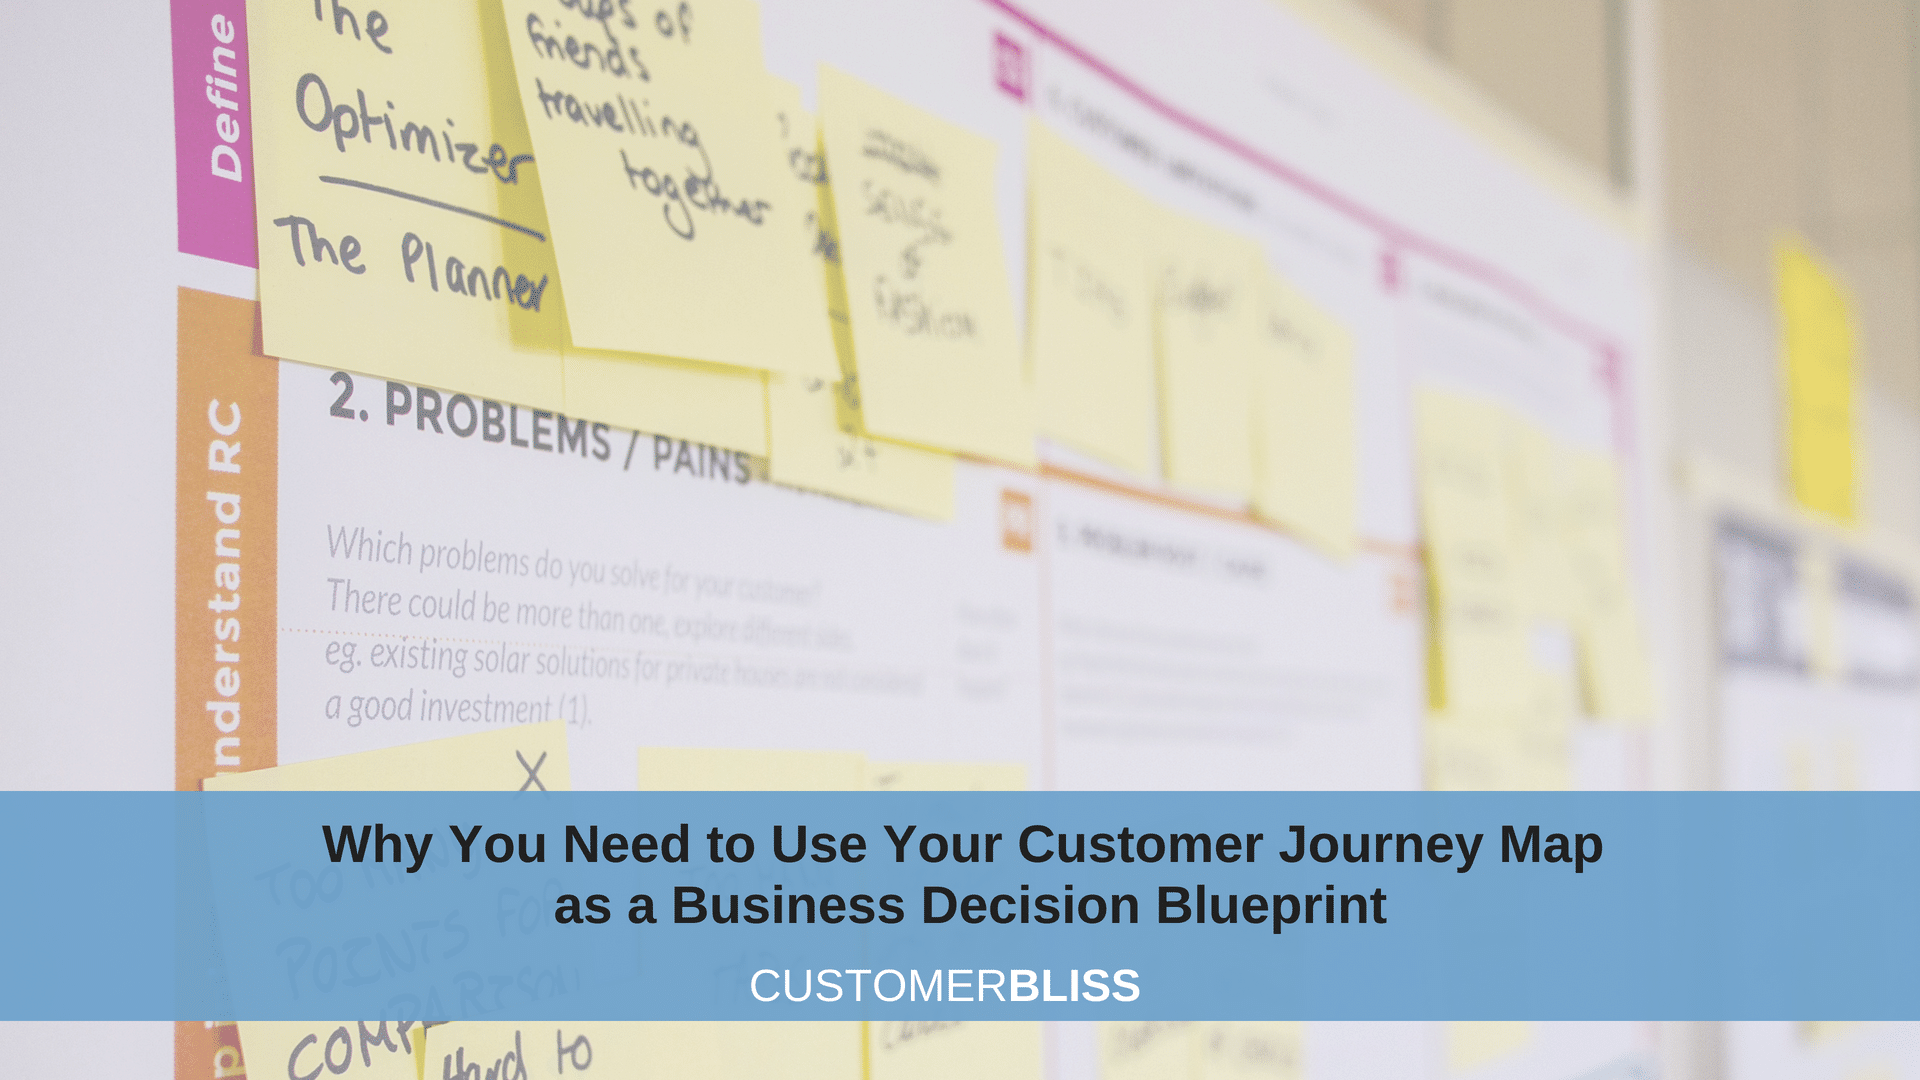 WHY YOU NEED TO USE YOUR CUSTOMER JOURNEY MAP AS A BUSINESS DECISION BLUEPRINT